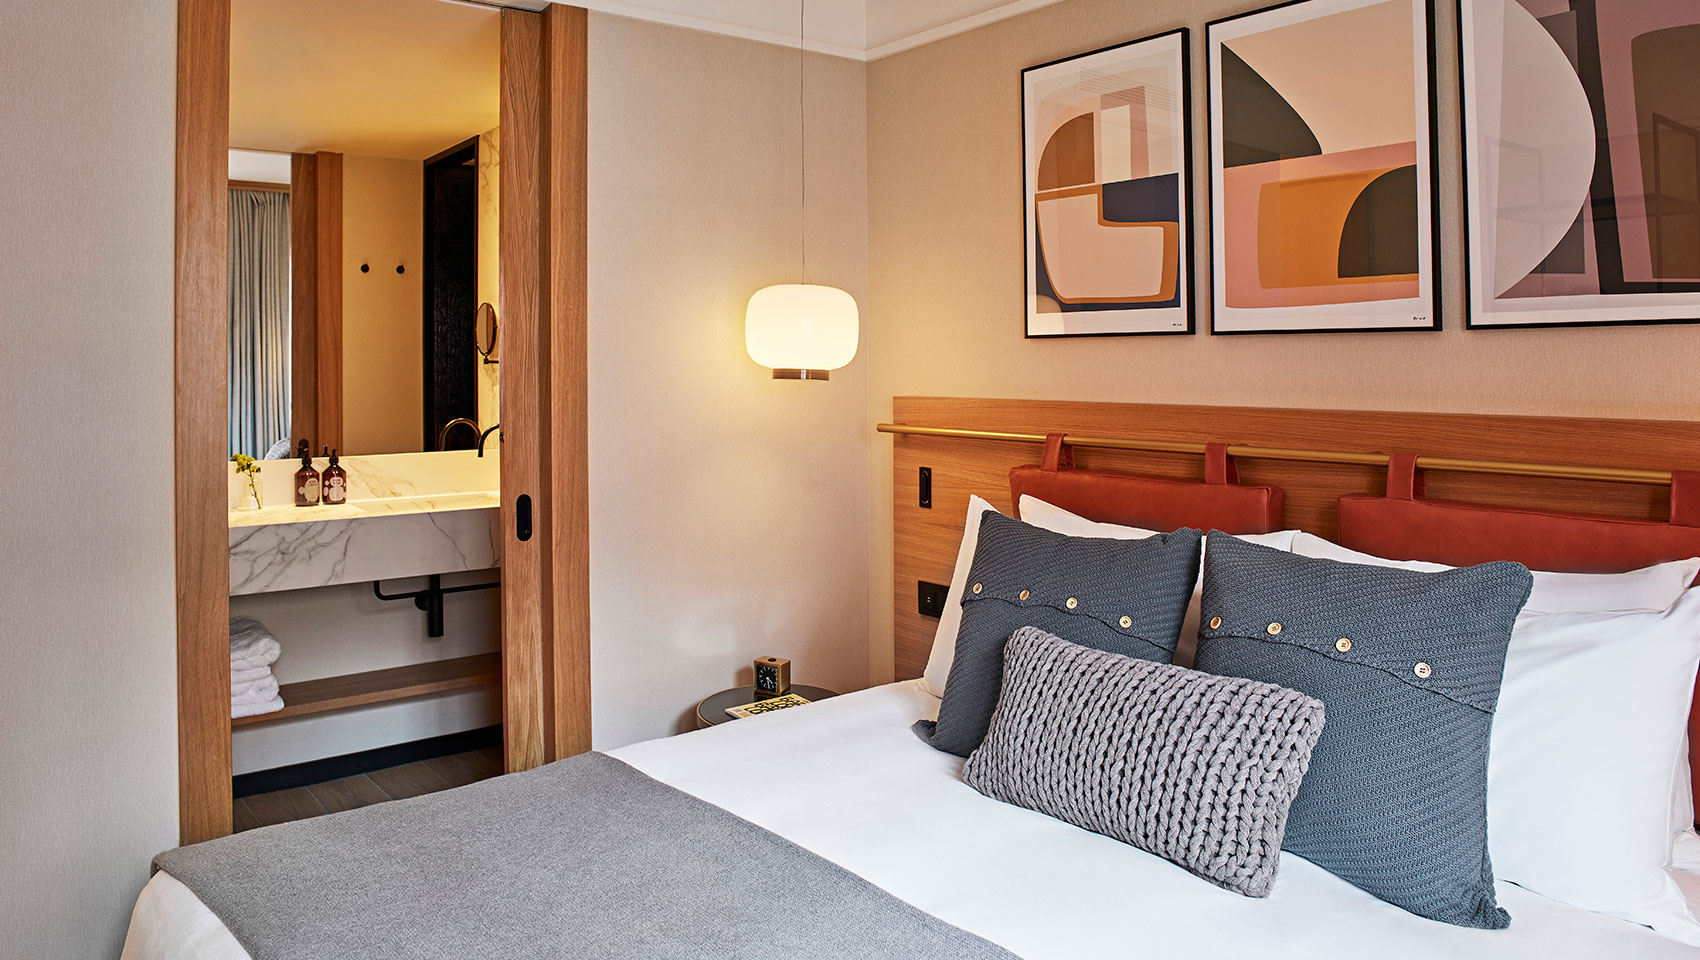 Warm and welcoming, inspired by Barcelona. Essential Room